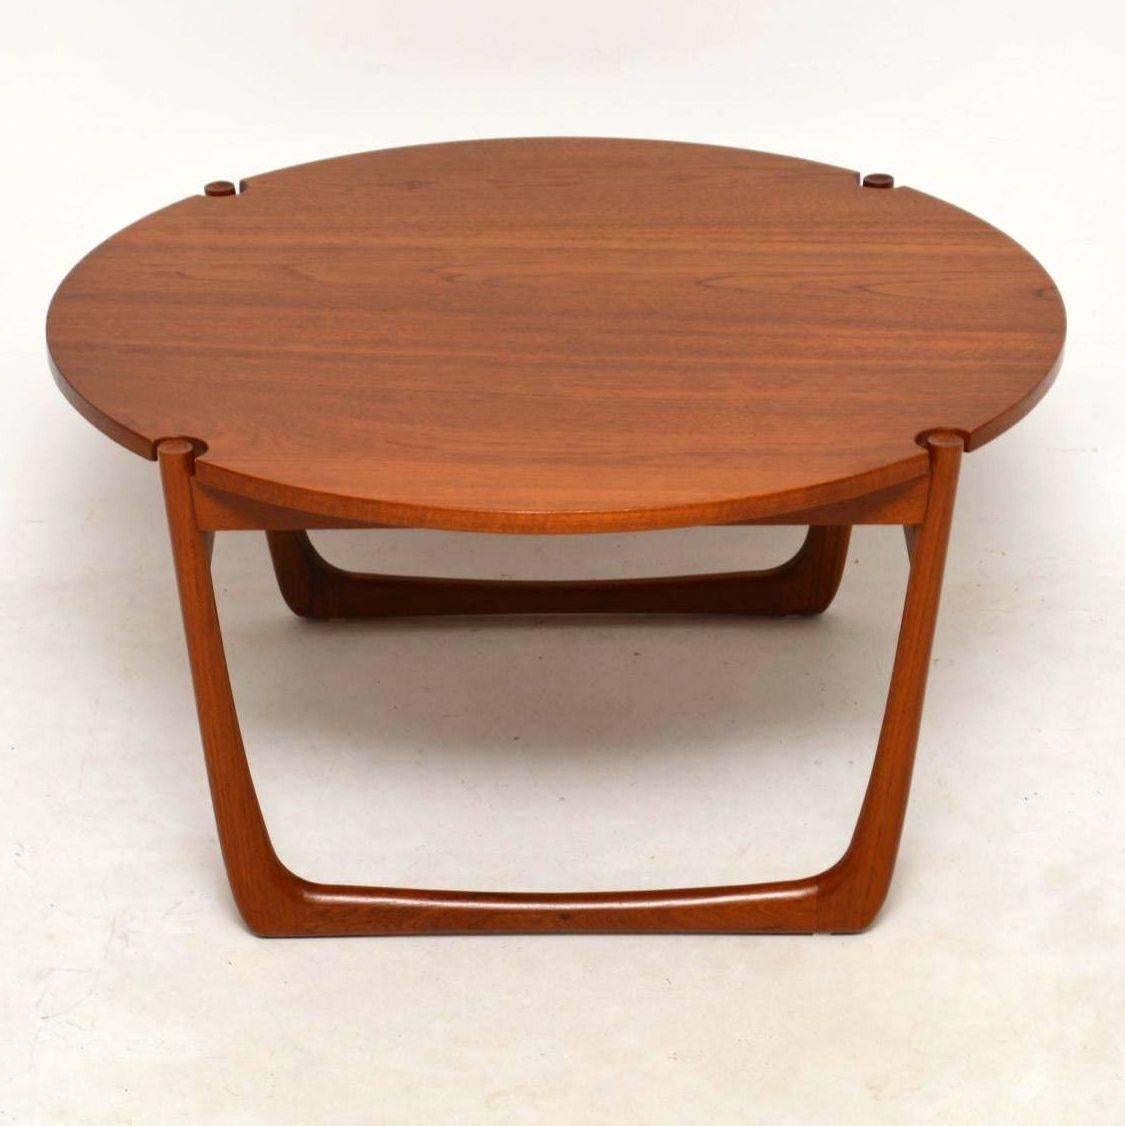 A beautiful and rare vintage coffee table in Teak, this was designed by Peter Hvidt & Orla Mølgaard Nielsen and it dates from the 1960s. This is a stunning design with a large circular top and wonderful sleigh legs. We have had this stripped and